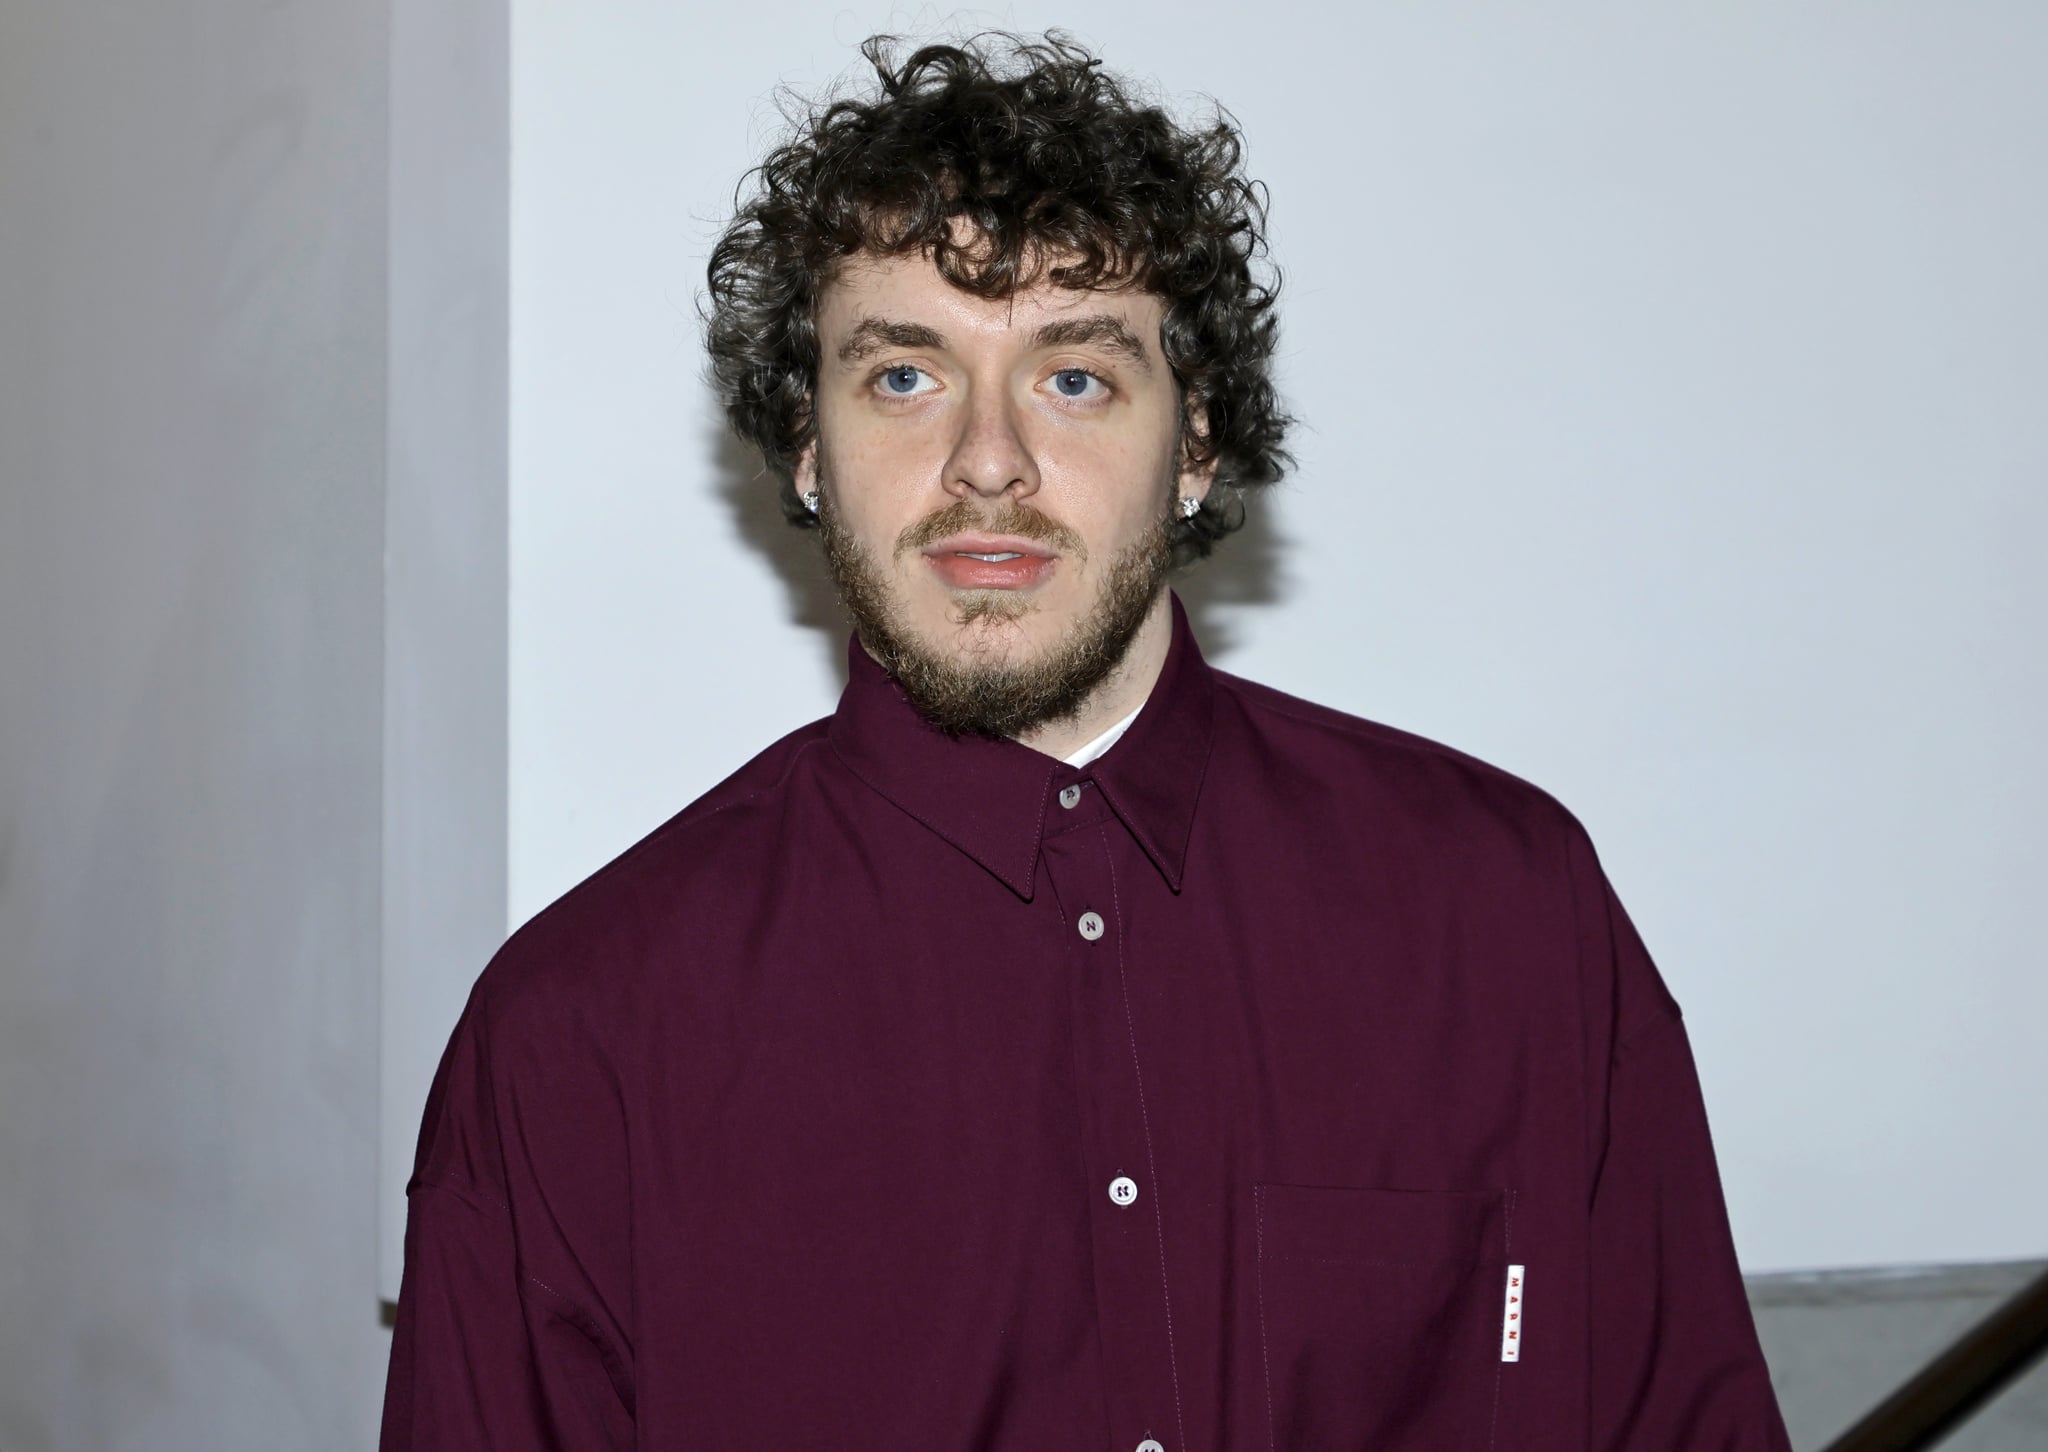 LOS ANGELES, CALIFORNIA - DECEMBER 03: Jack Harlow attends Variety's 2022 Hitmakers Brunch at City Market Social House on December 03, 2022 in Los Angeles, California. (Photo by Kevin Winter/Getty Images)